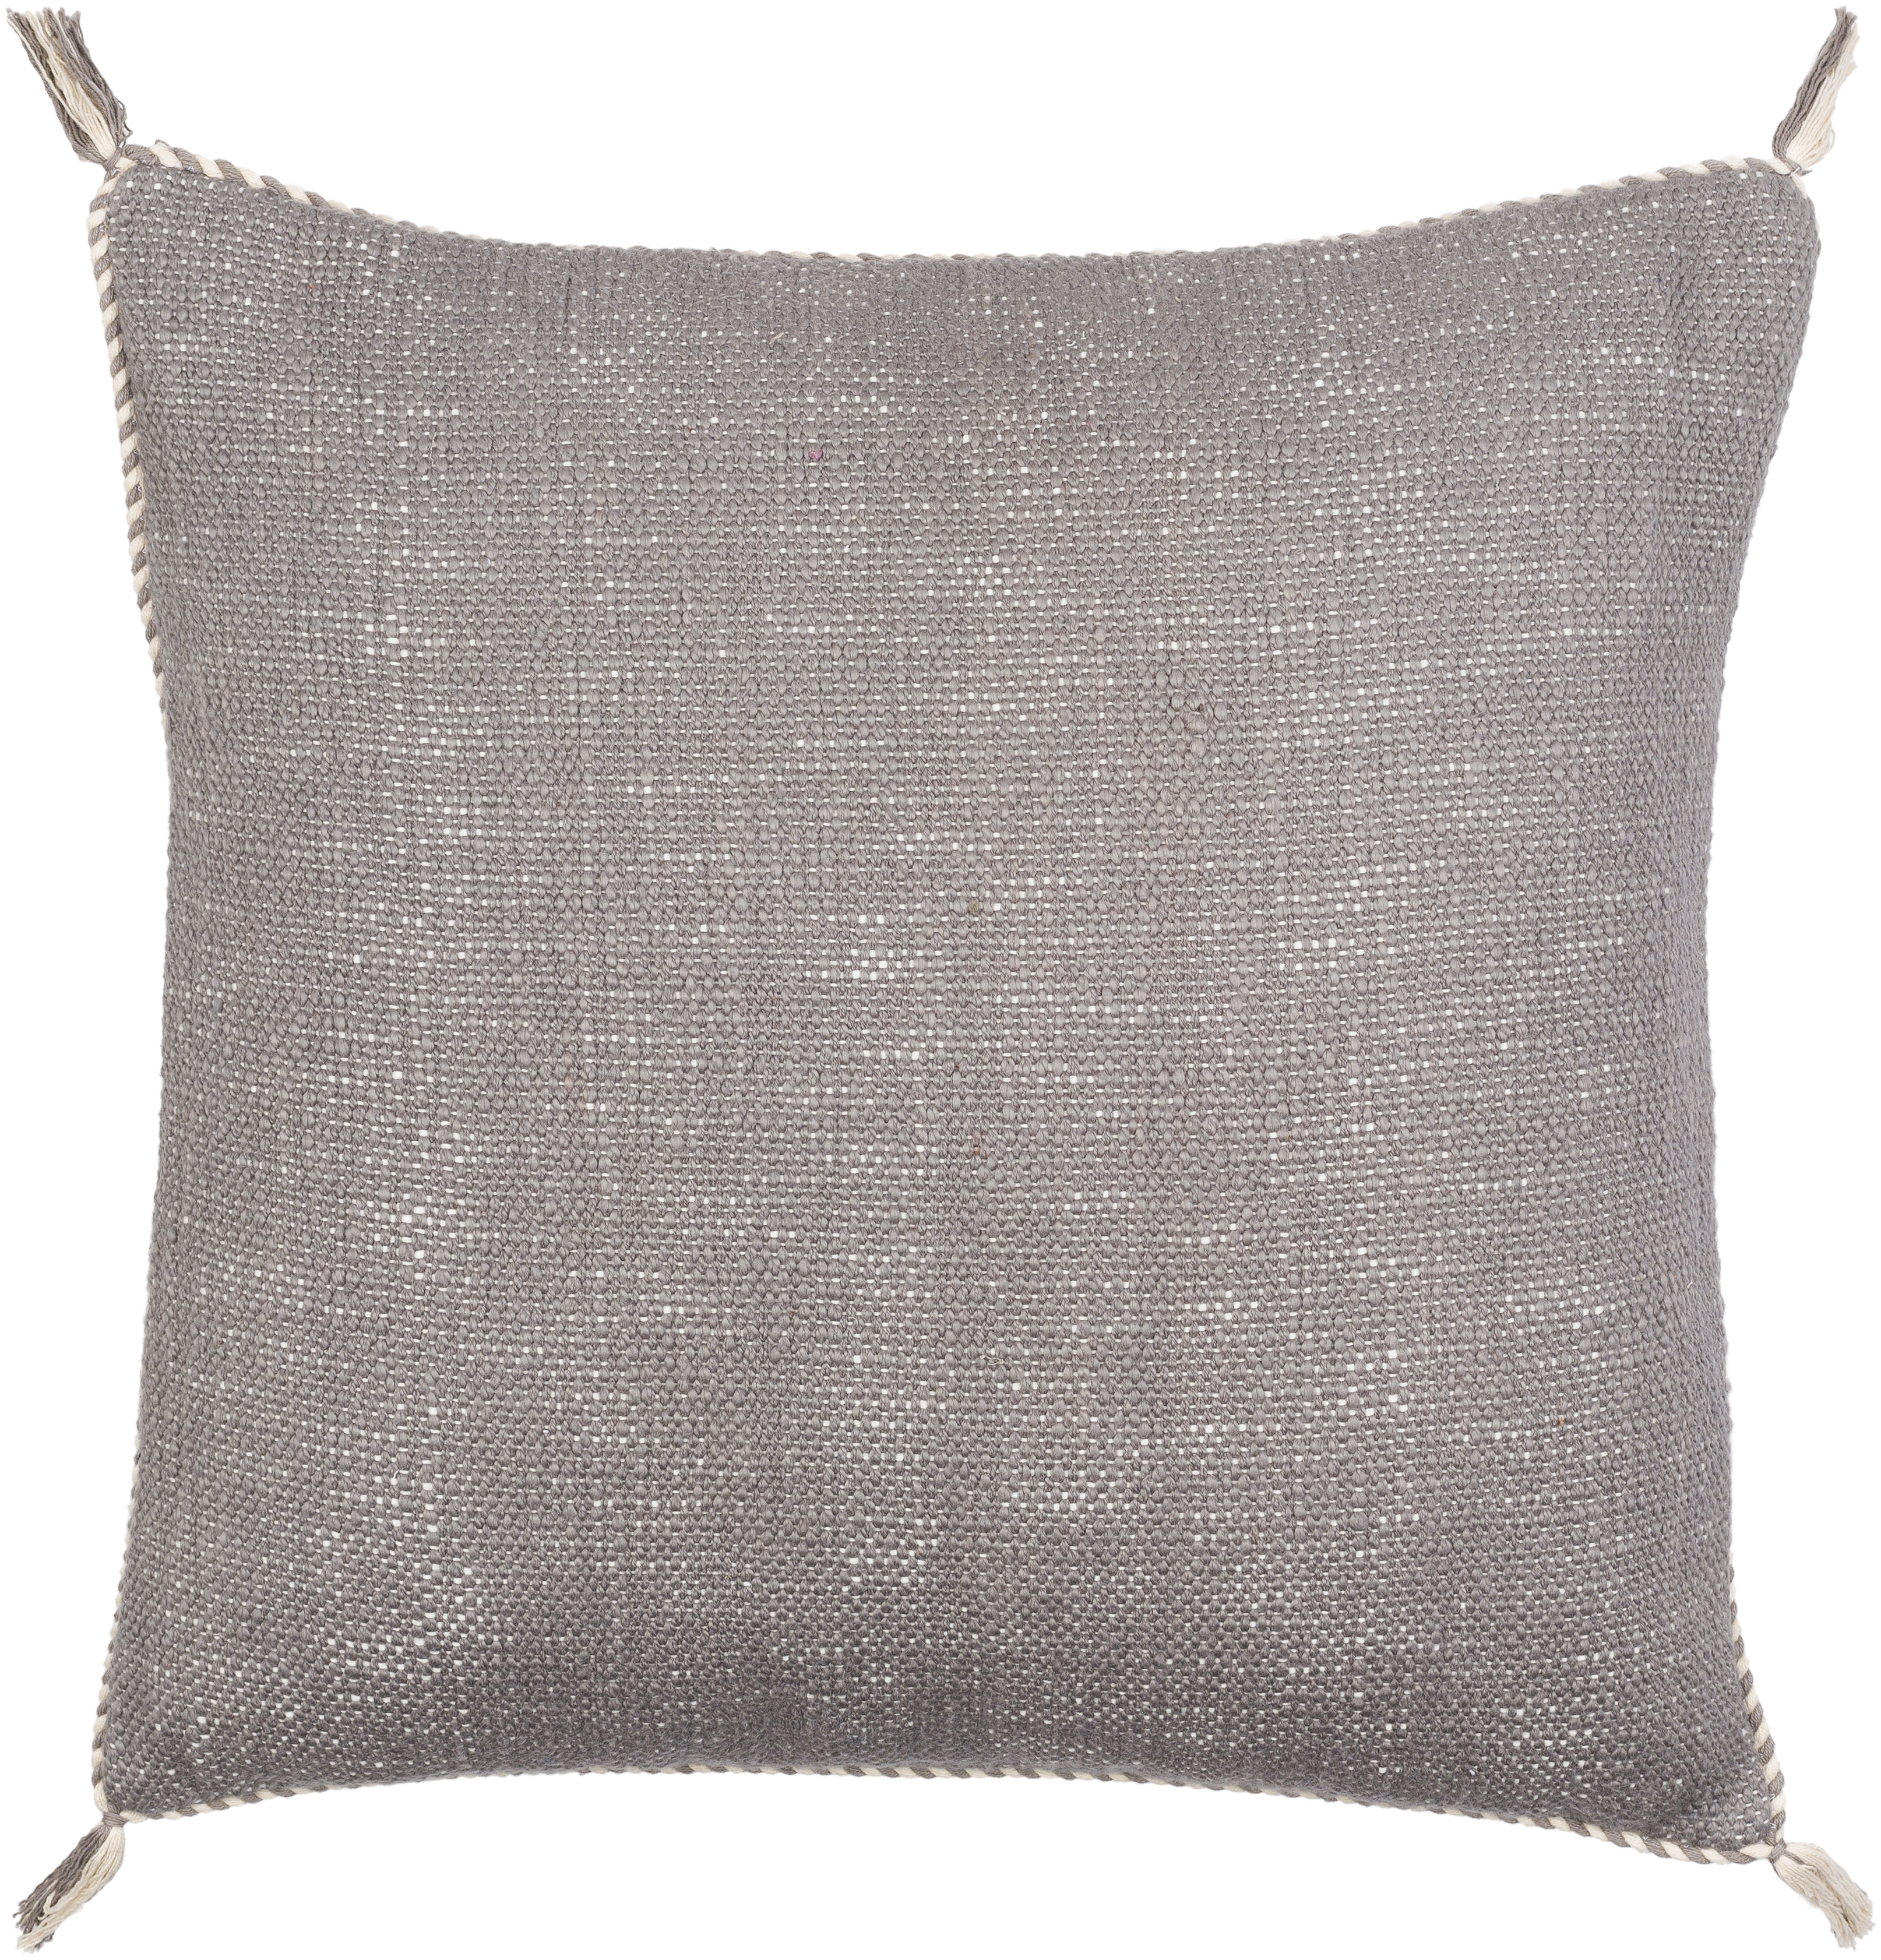 Braided Bisa Throw Pillow, 20" x 20", pillow cover only - Image 0